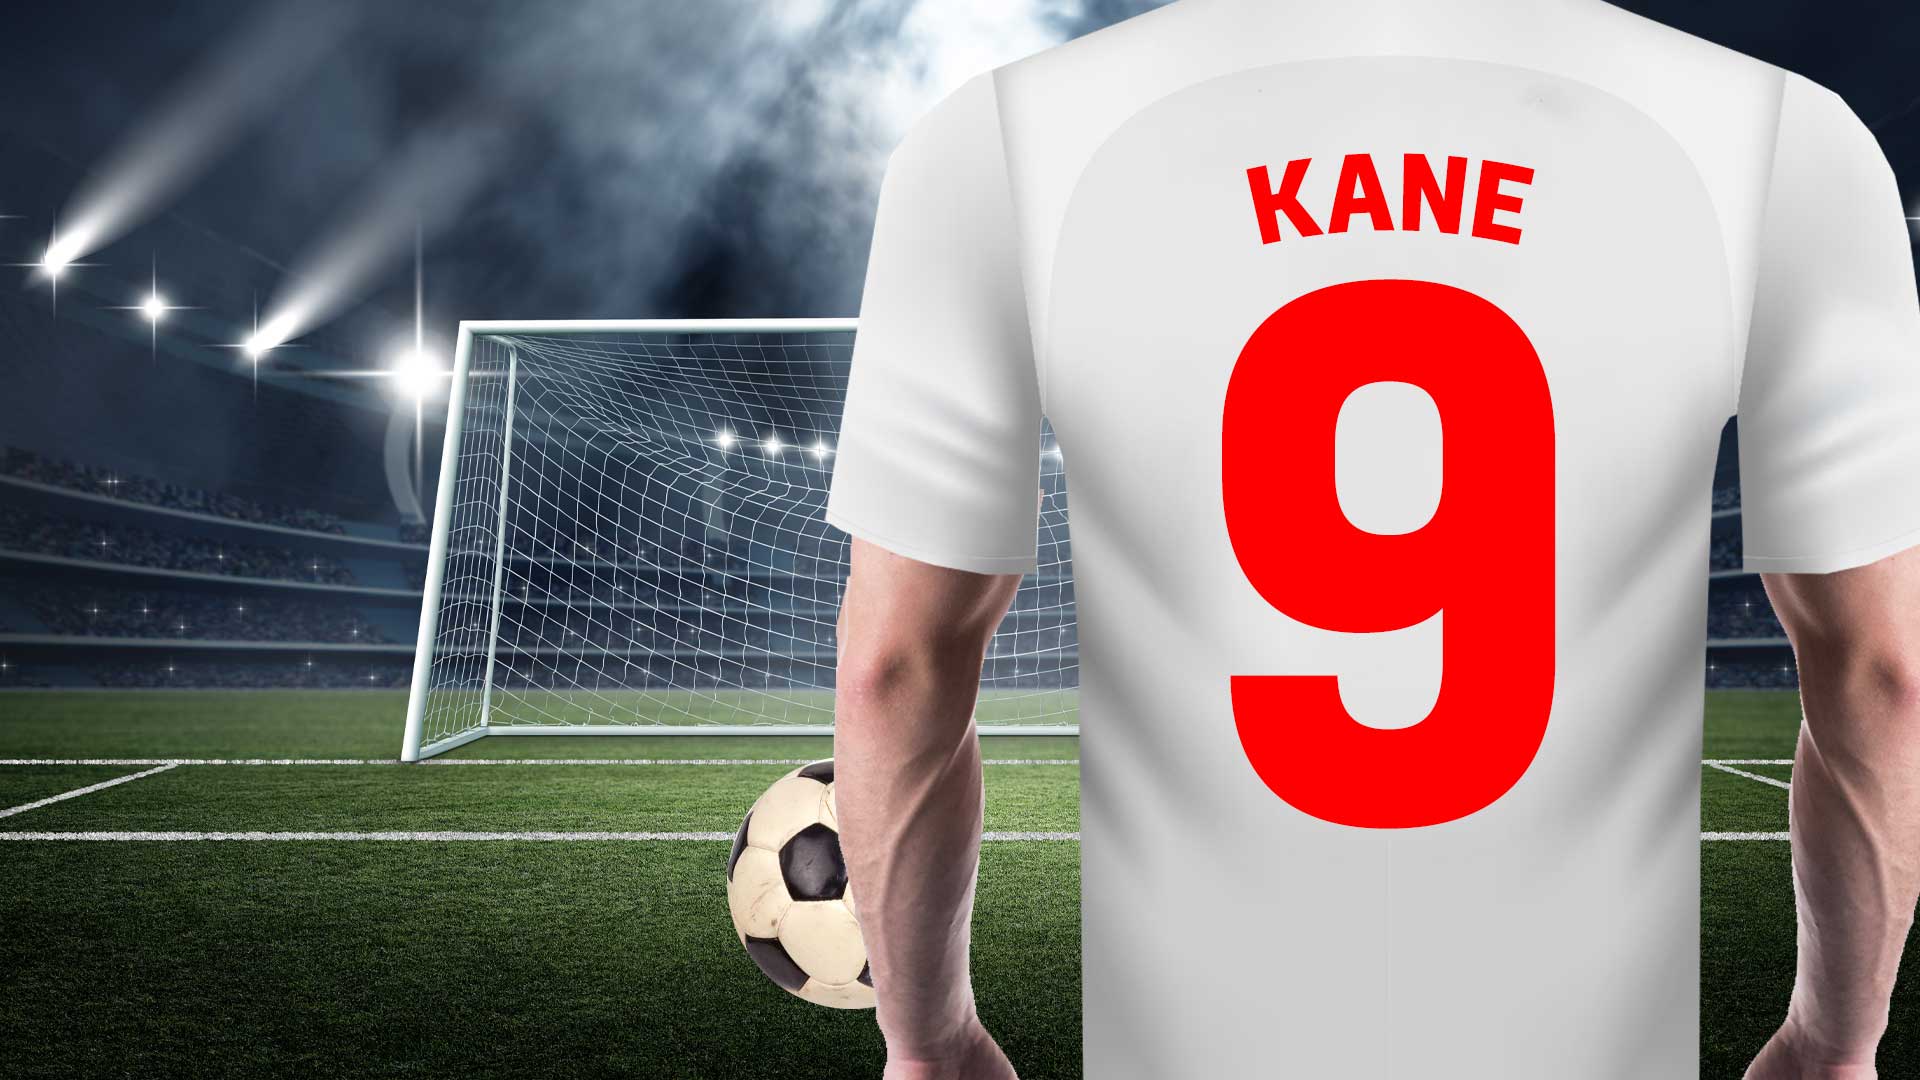 Kane's number 9 shirt in front of goal